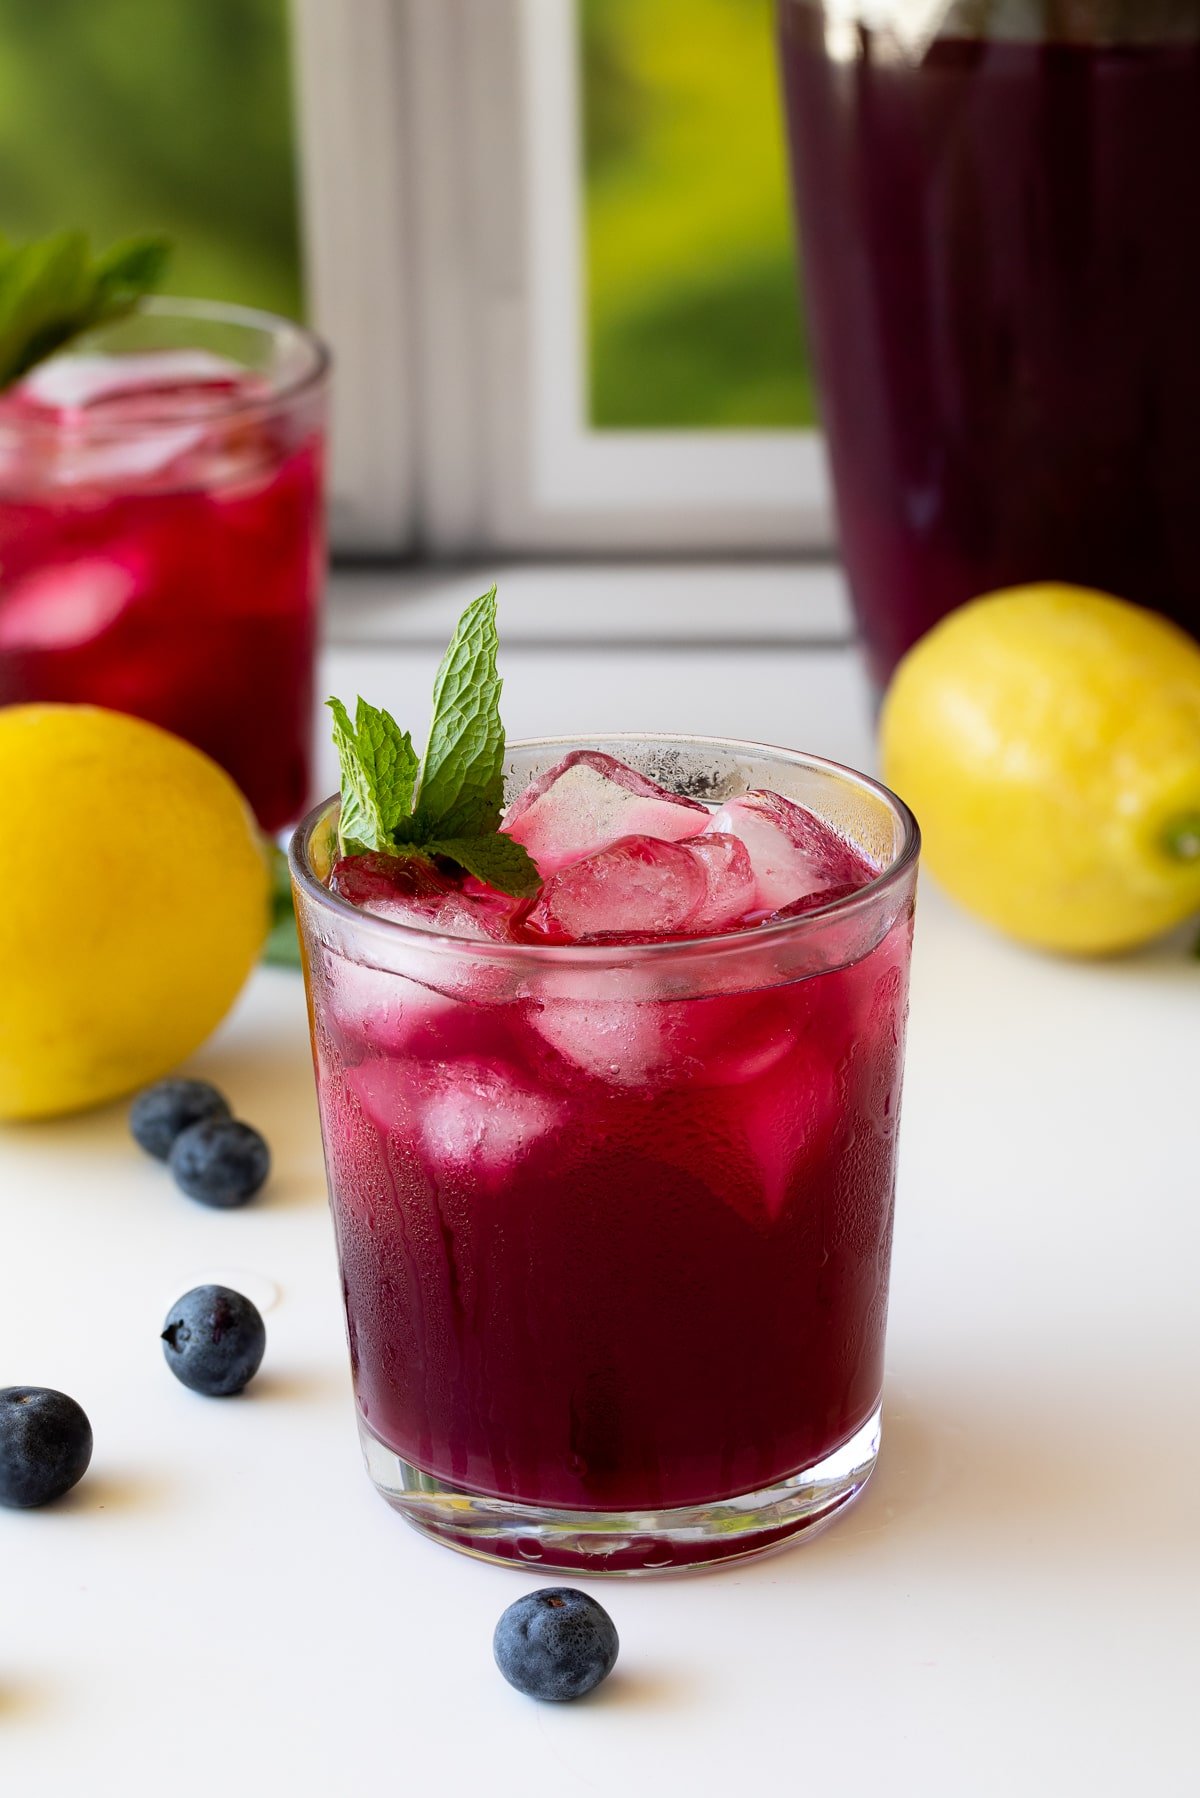 blueberry lemonade is glass with mint.